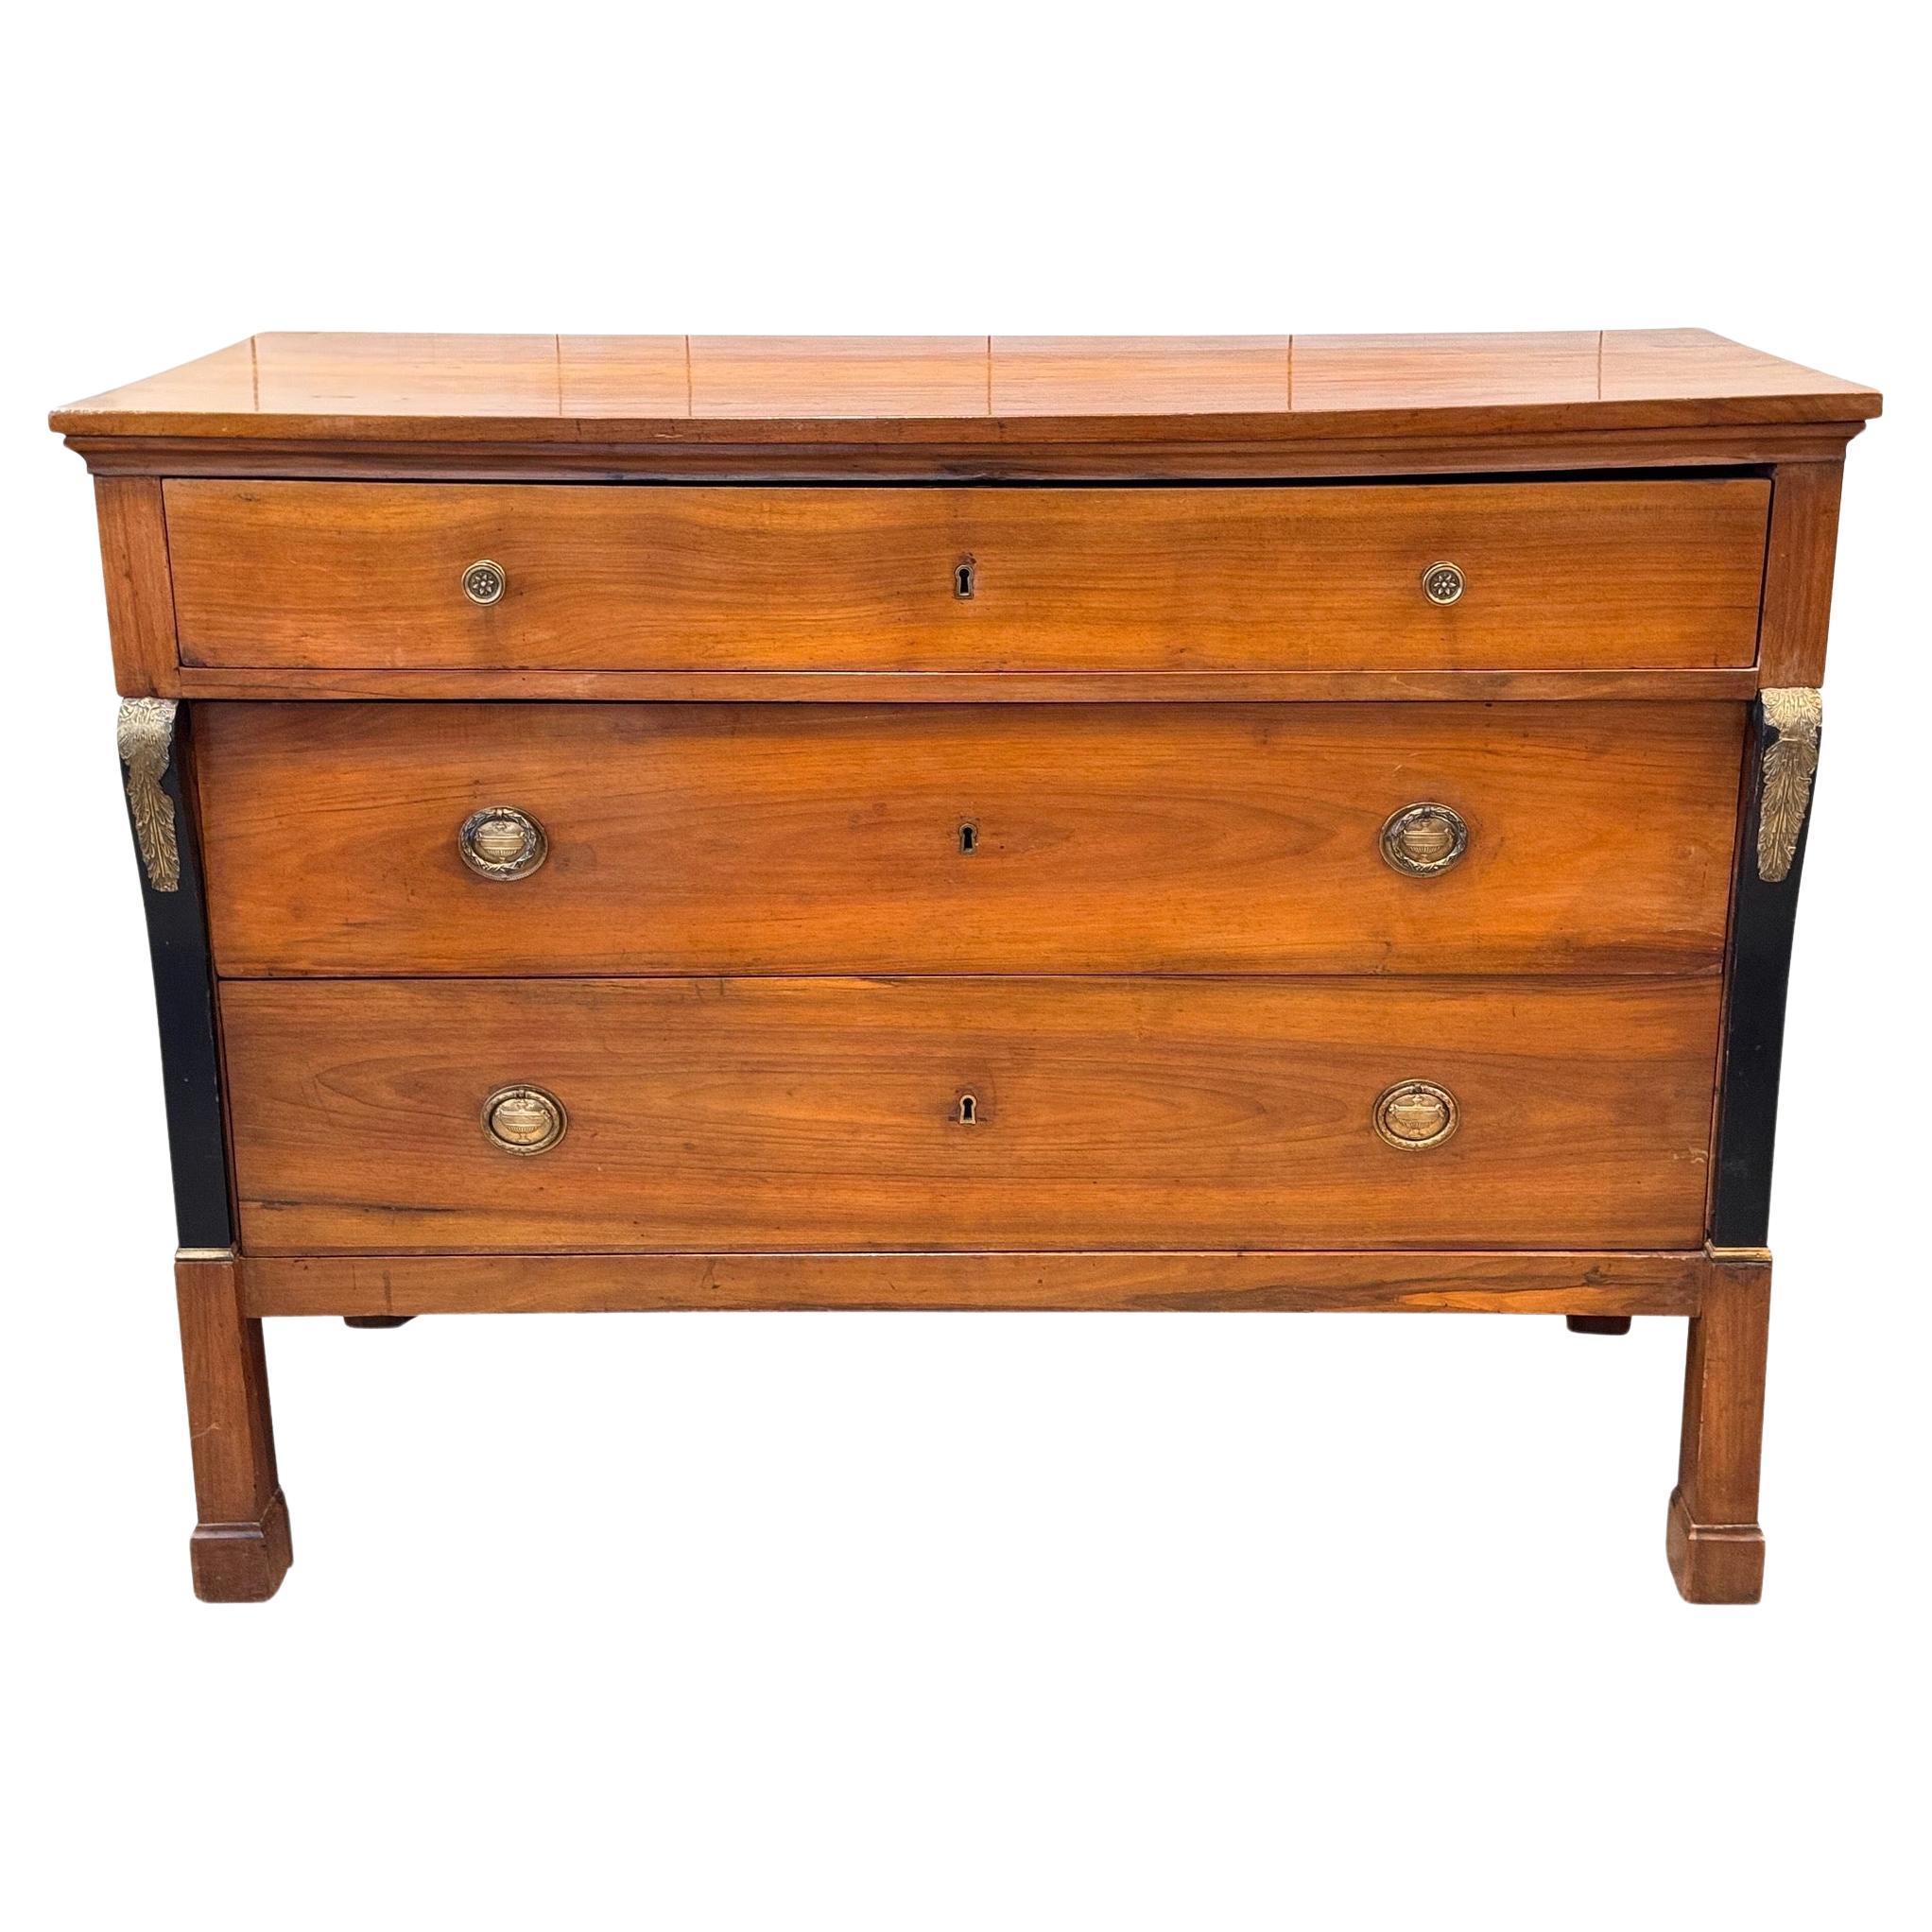 19th Century French Empire Chest With Black Columns